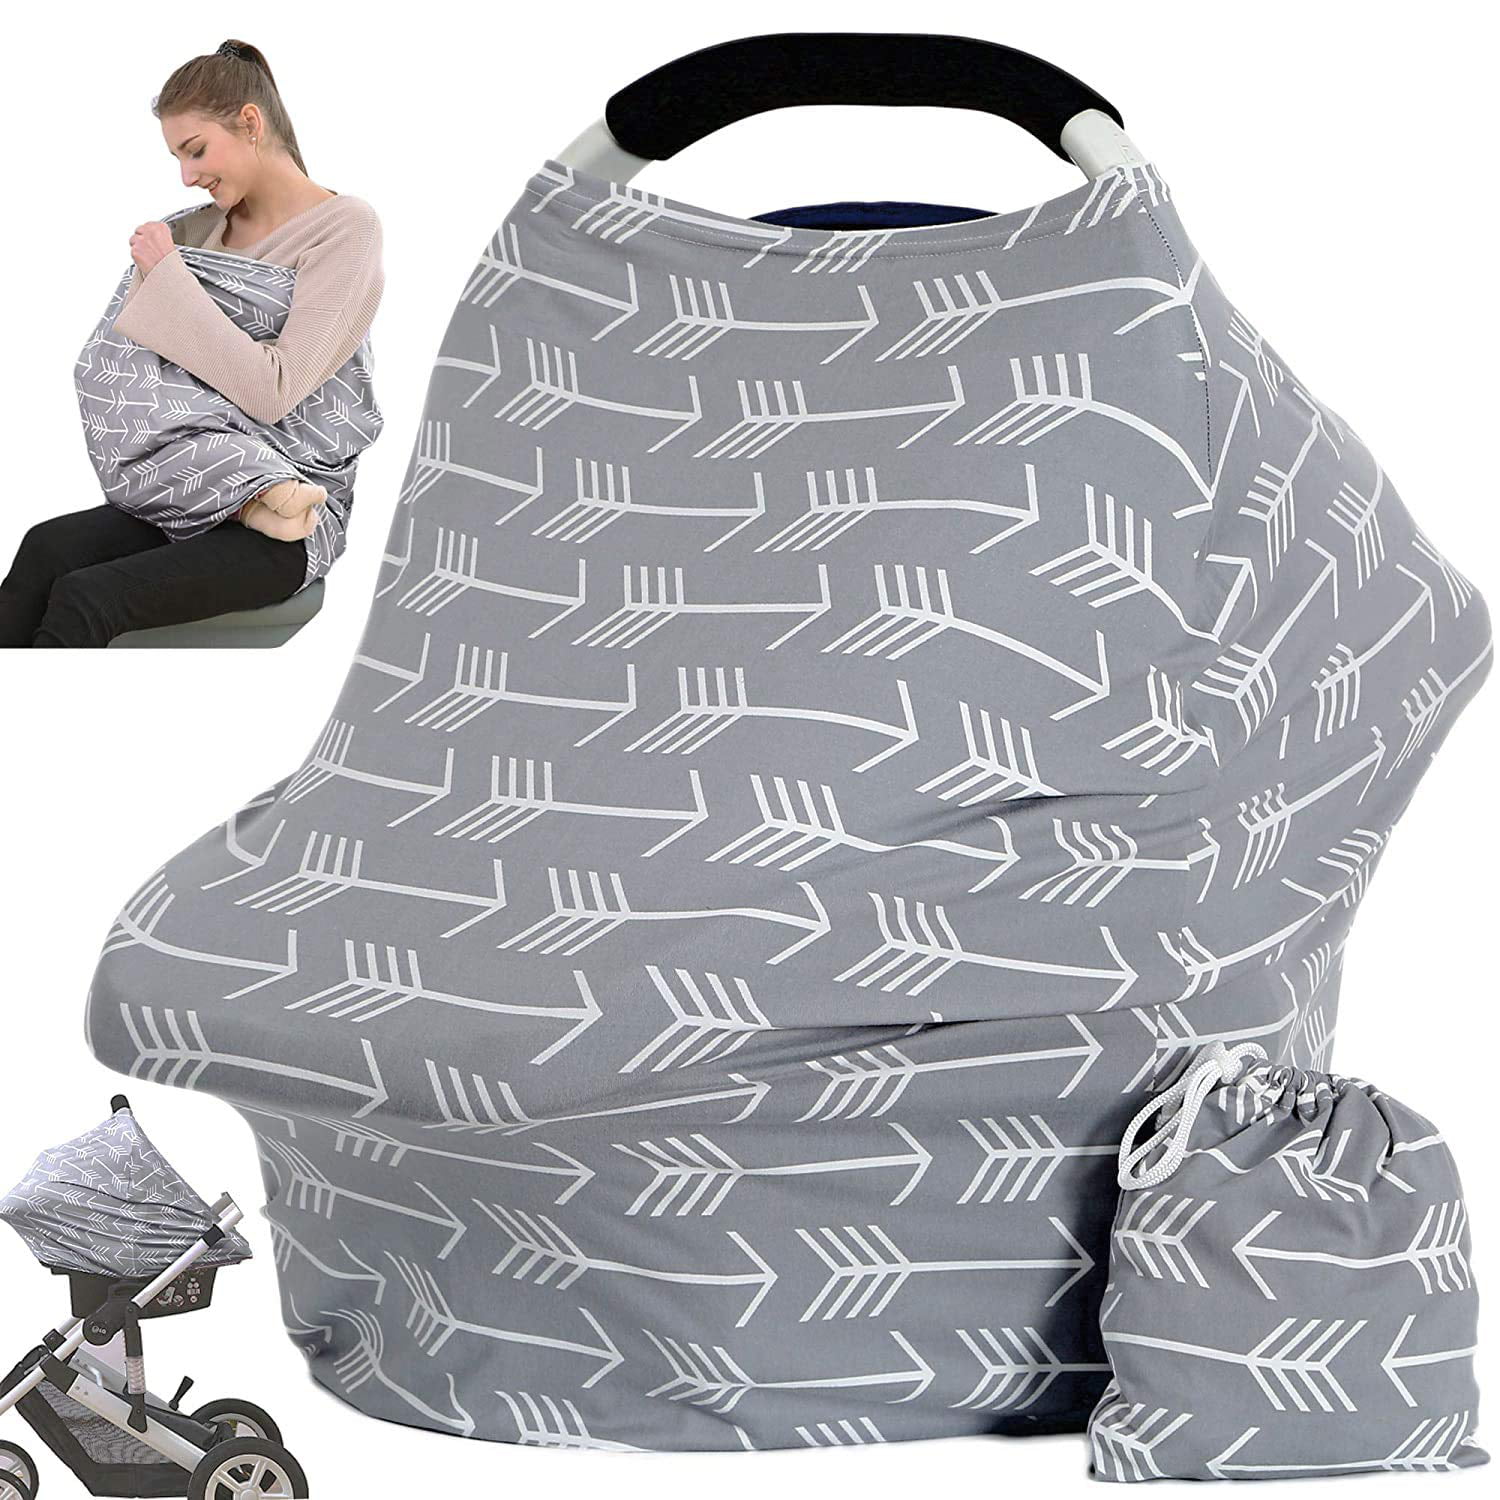 Cream Rose Carseat Canopy Stroller Covers for Breastfeeding Car Seat Canopy Cover CarSeat Covers for Baby Girls 